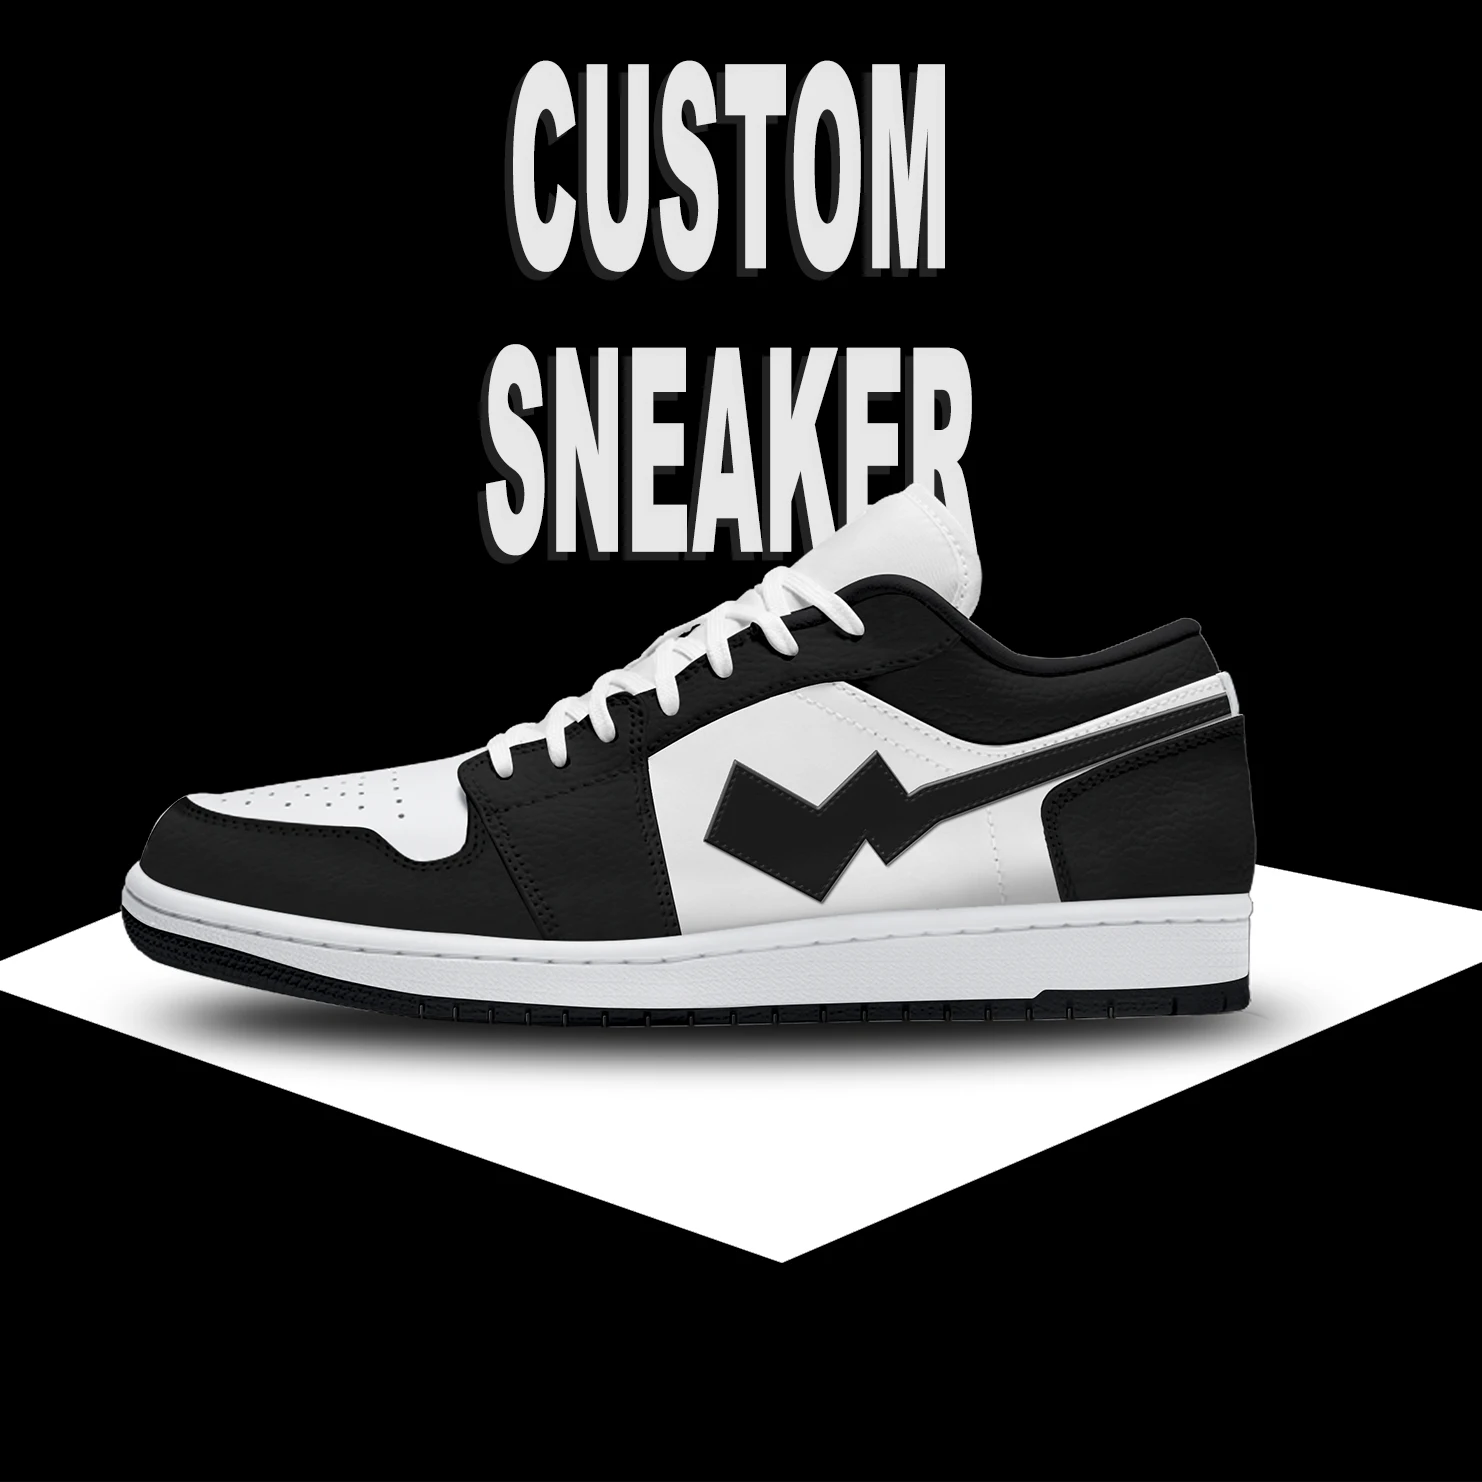 Wholesale Custom Logo Rubber Sole Suede Patent Genuine Leather Microfiber Men's Low-top Skateboard Shoes Basketball Sneakers